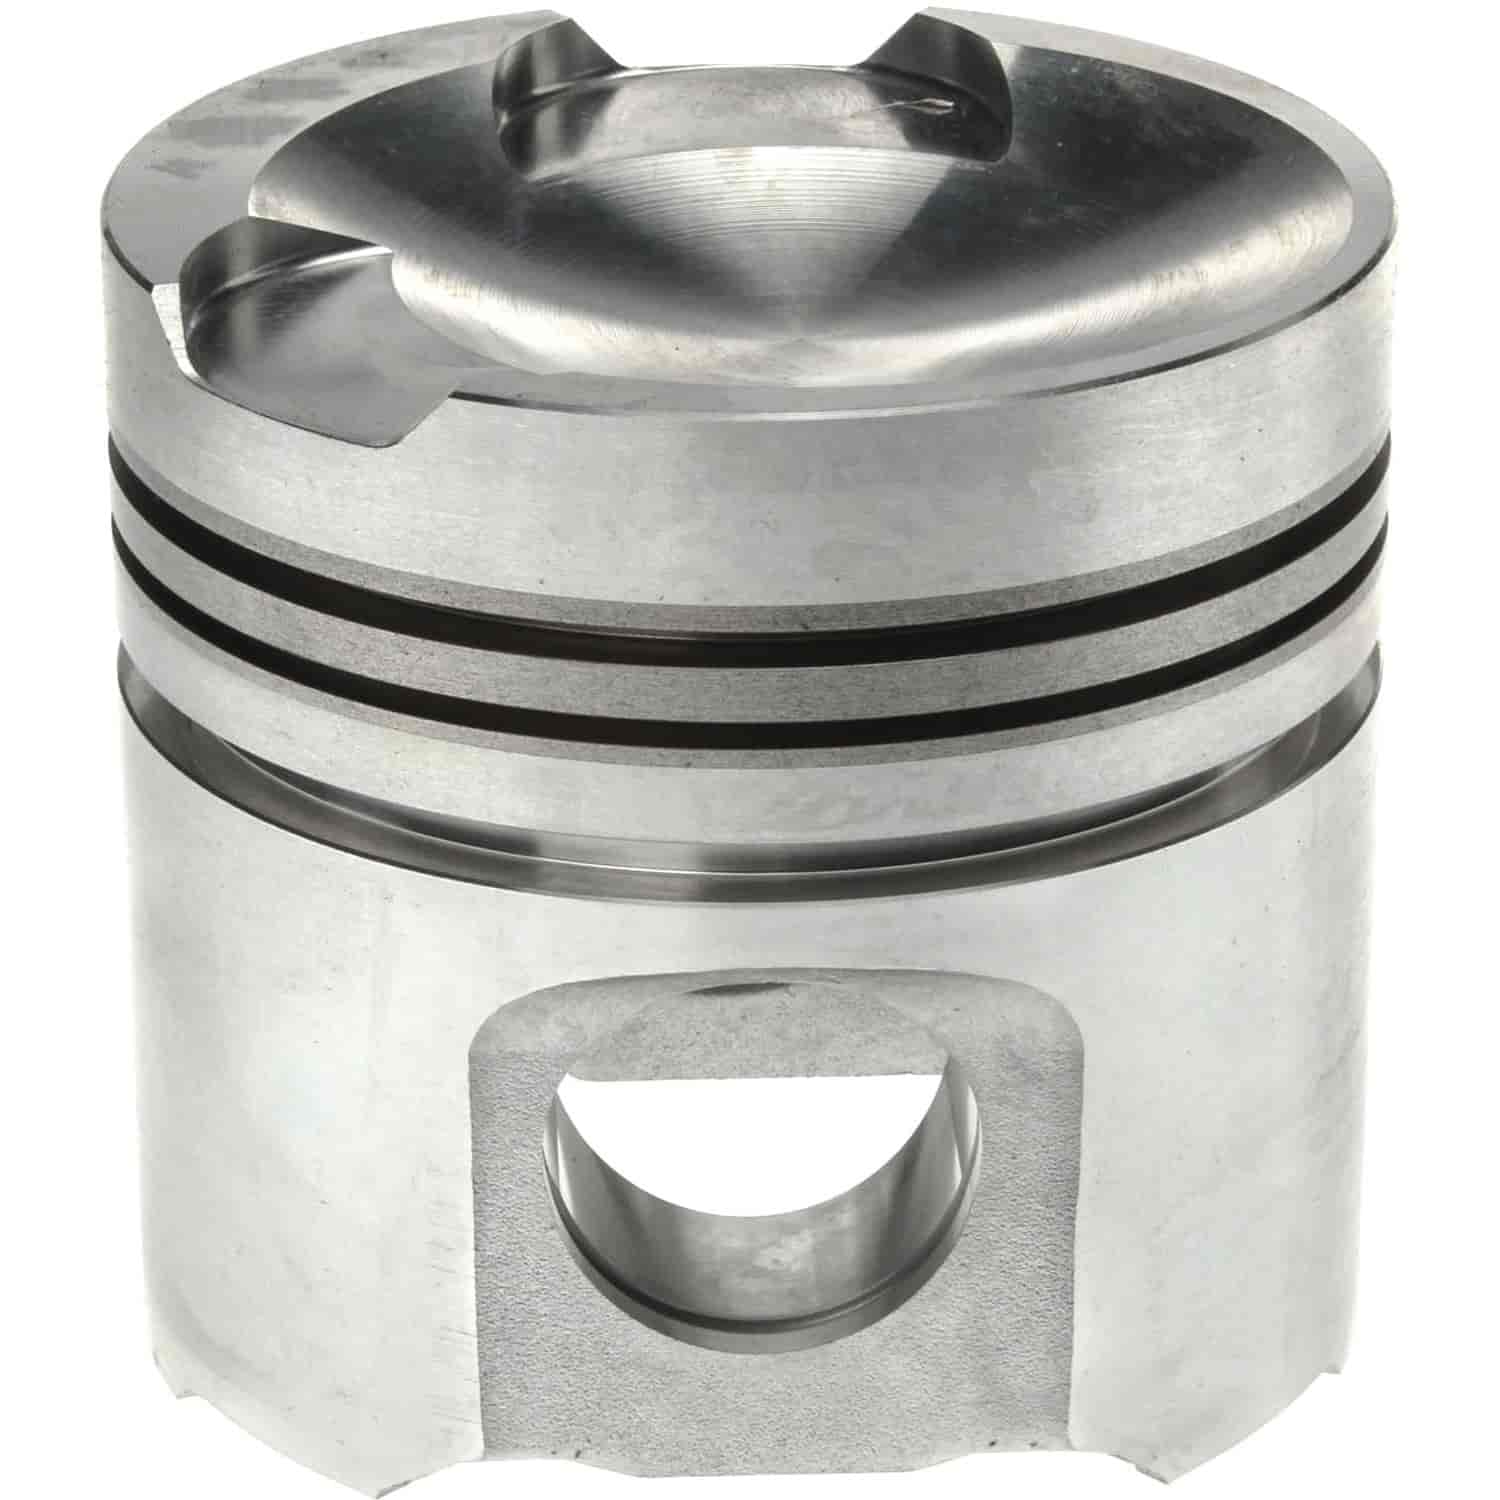 Piston Without Piston Pin Caterpillar 4.750 Bore 4-6 cyl 3304-3306 Diesel Engine